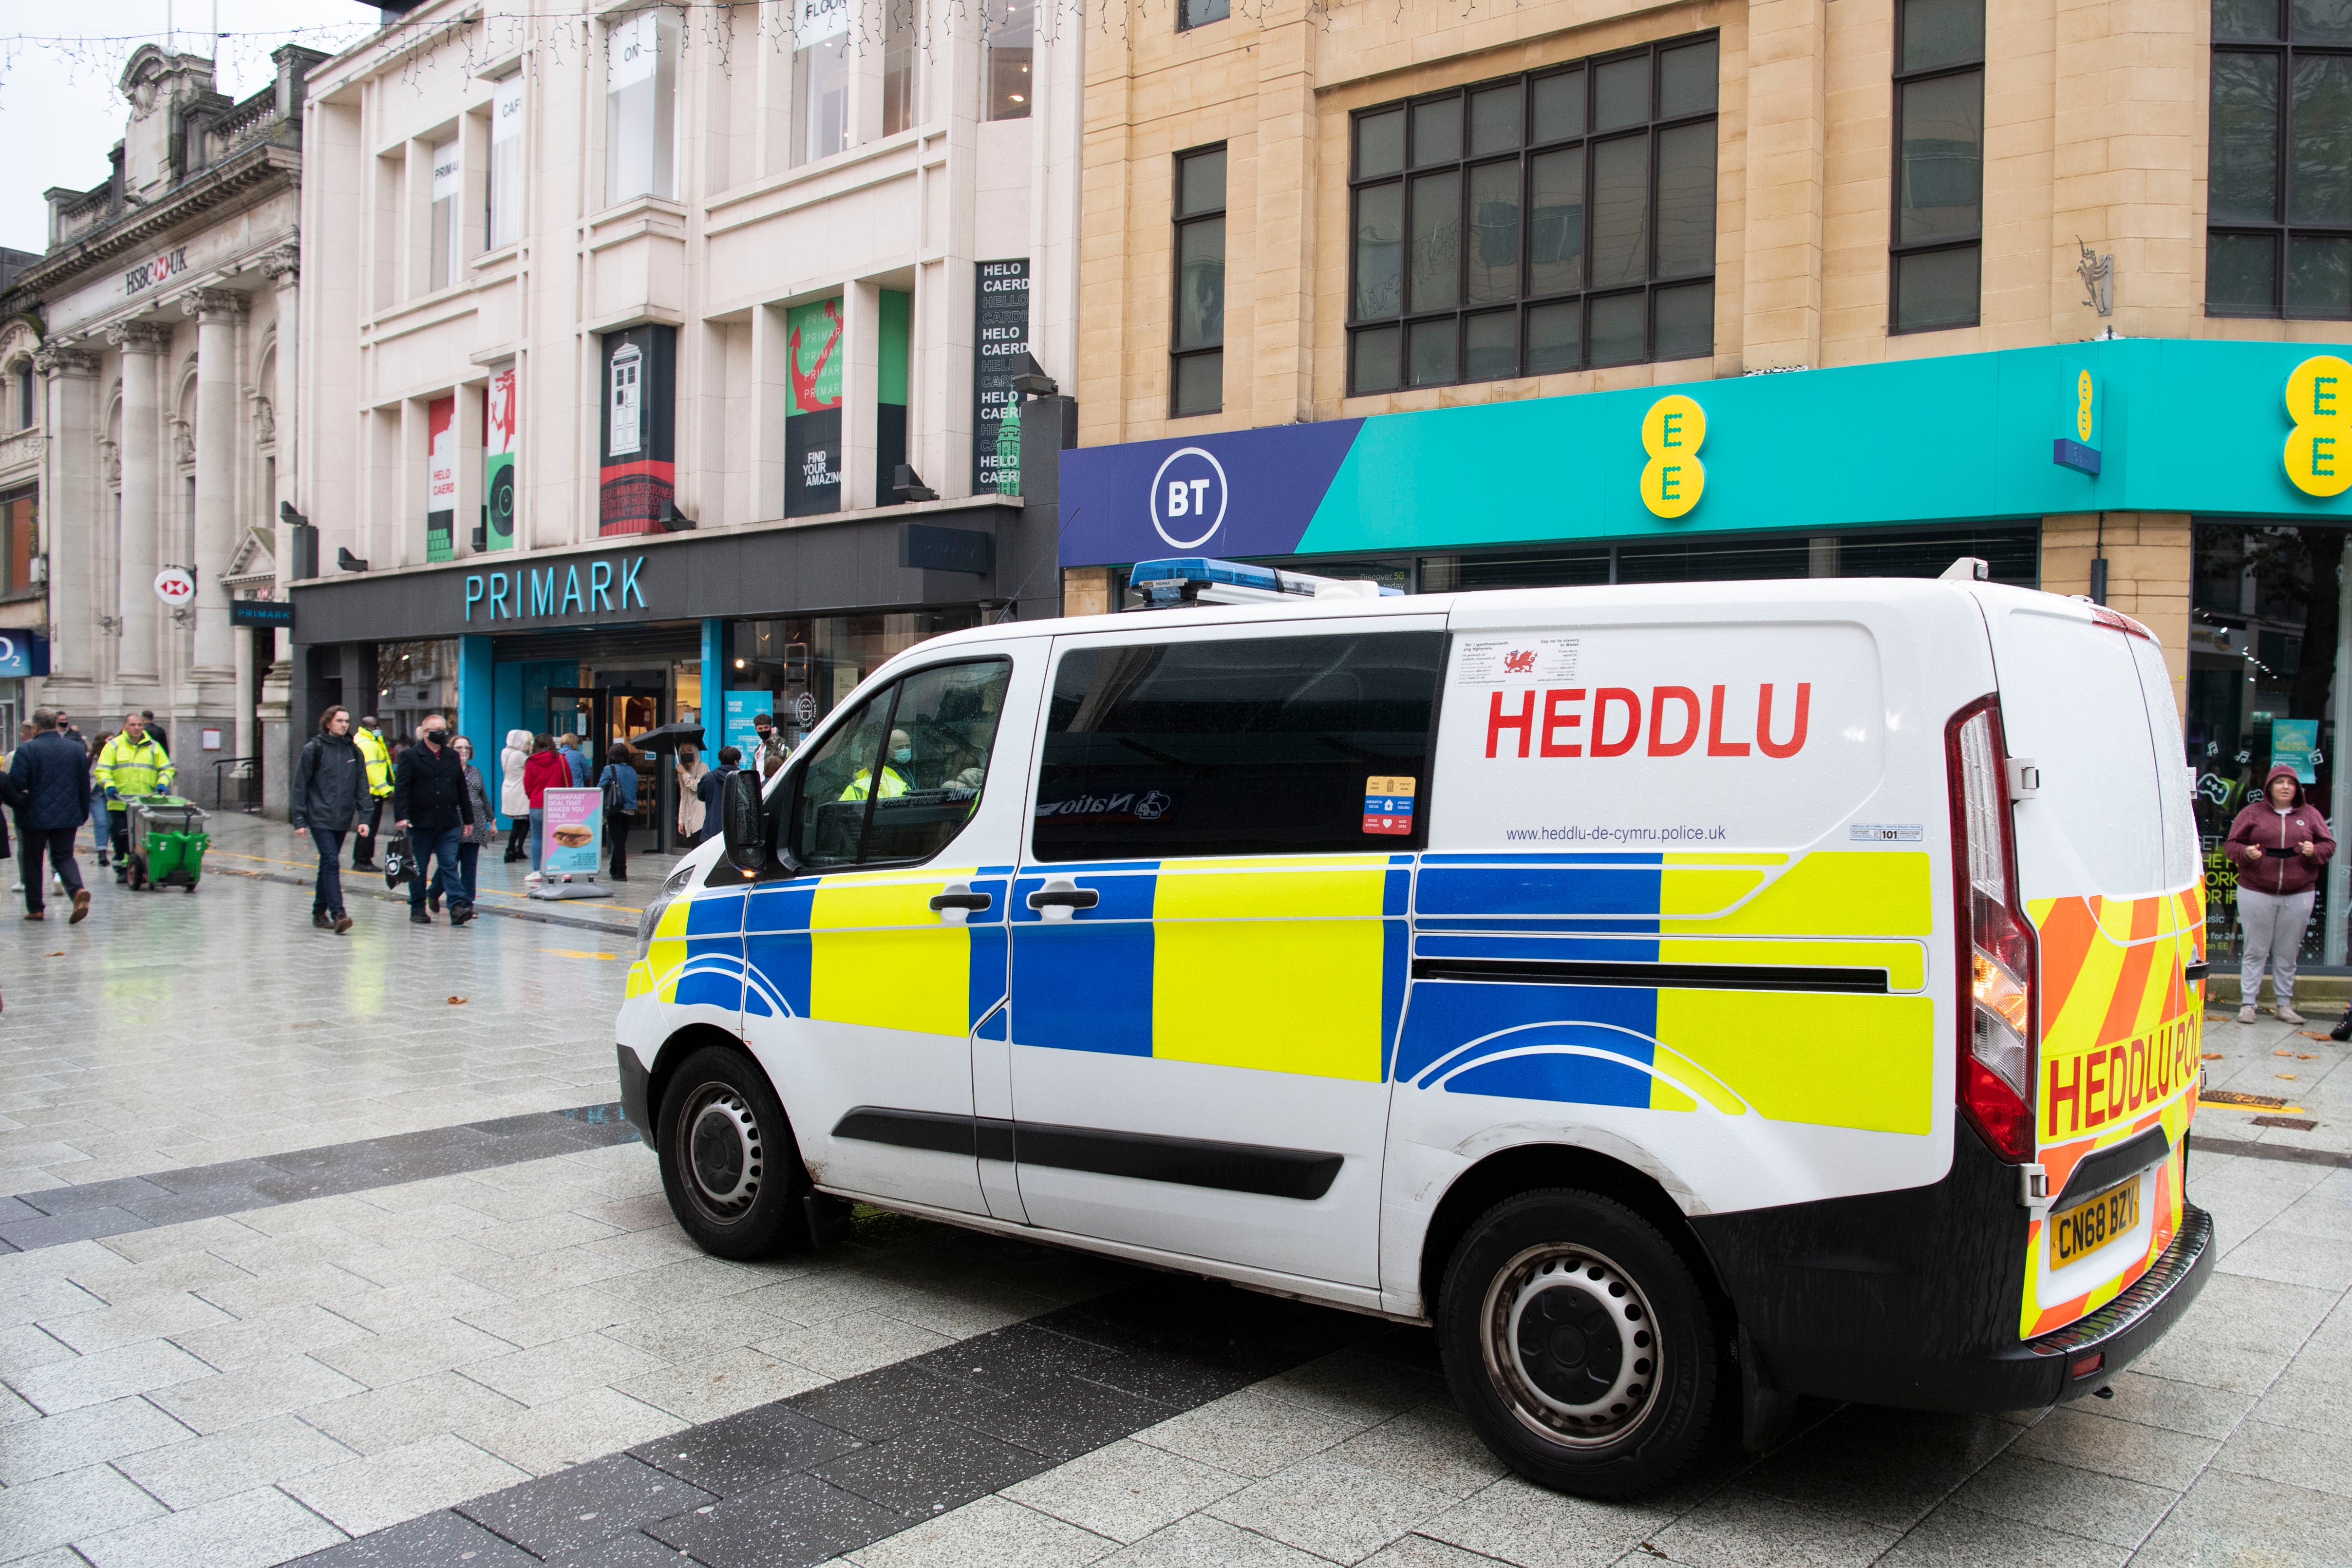 police van drives down Queen Street on November 9, 2020 in Cardiff, Wales. Six people received treatment in hospital after a violent incident unfolded in the city centre on Saturday, 22 November, 2020.